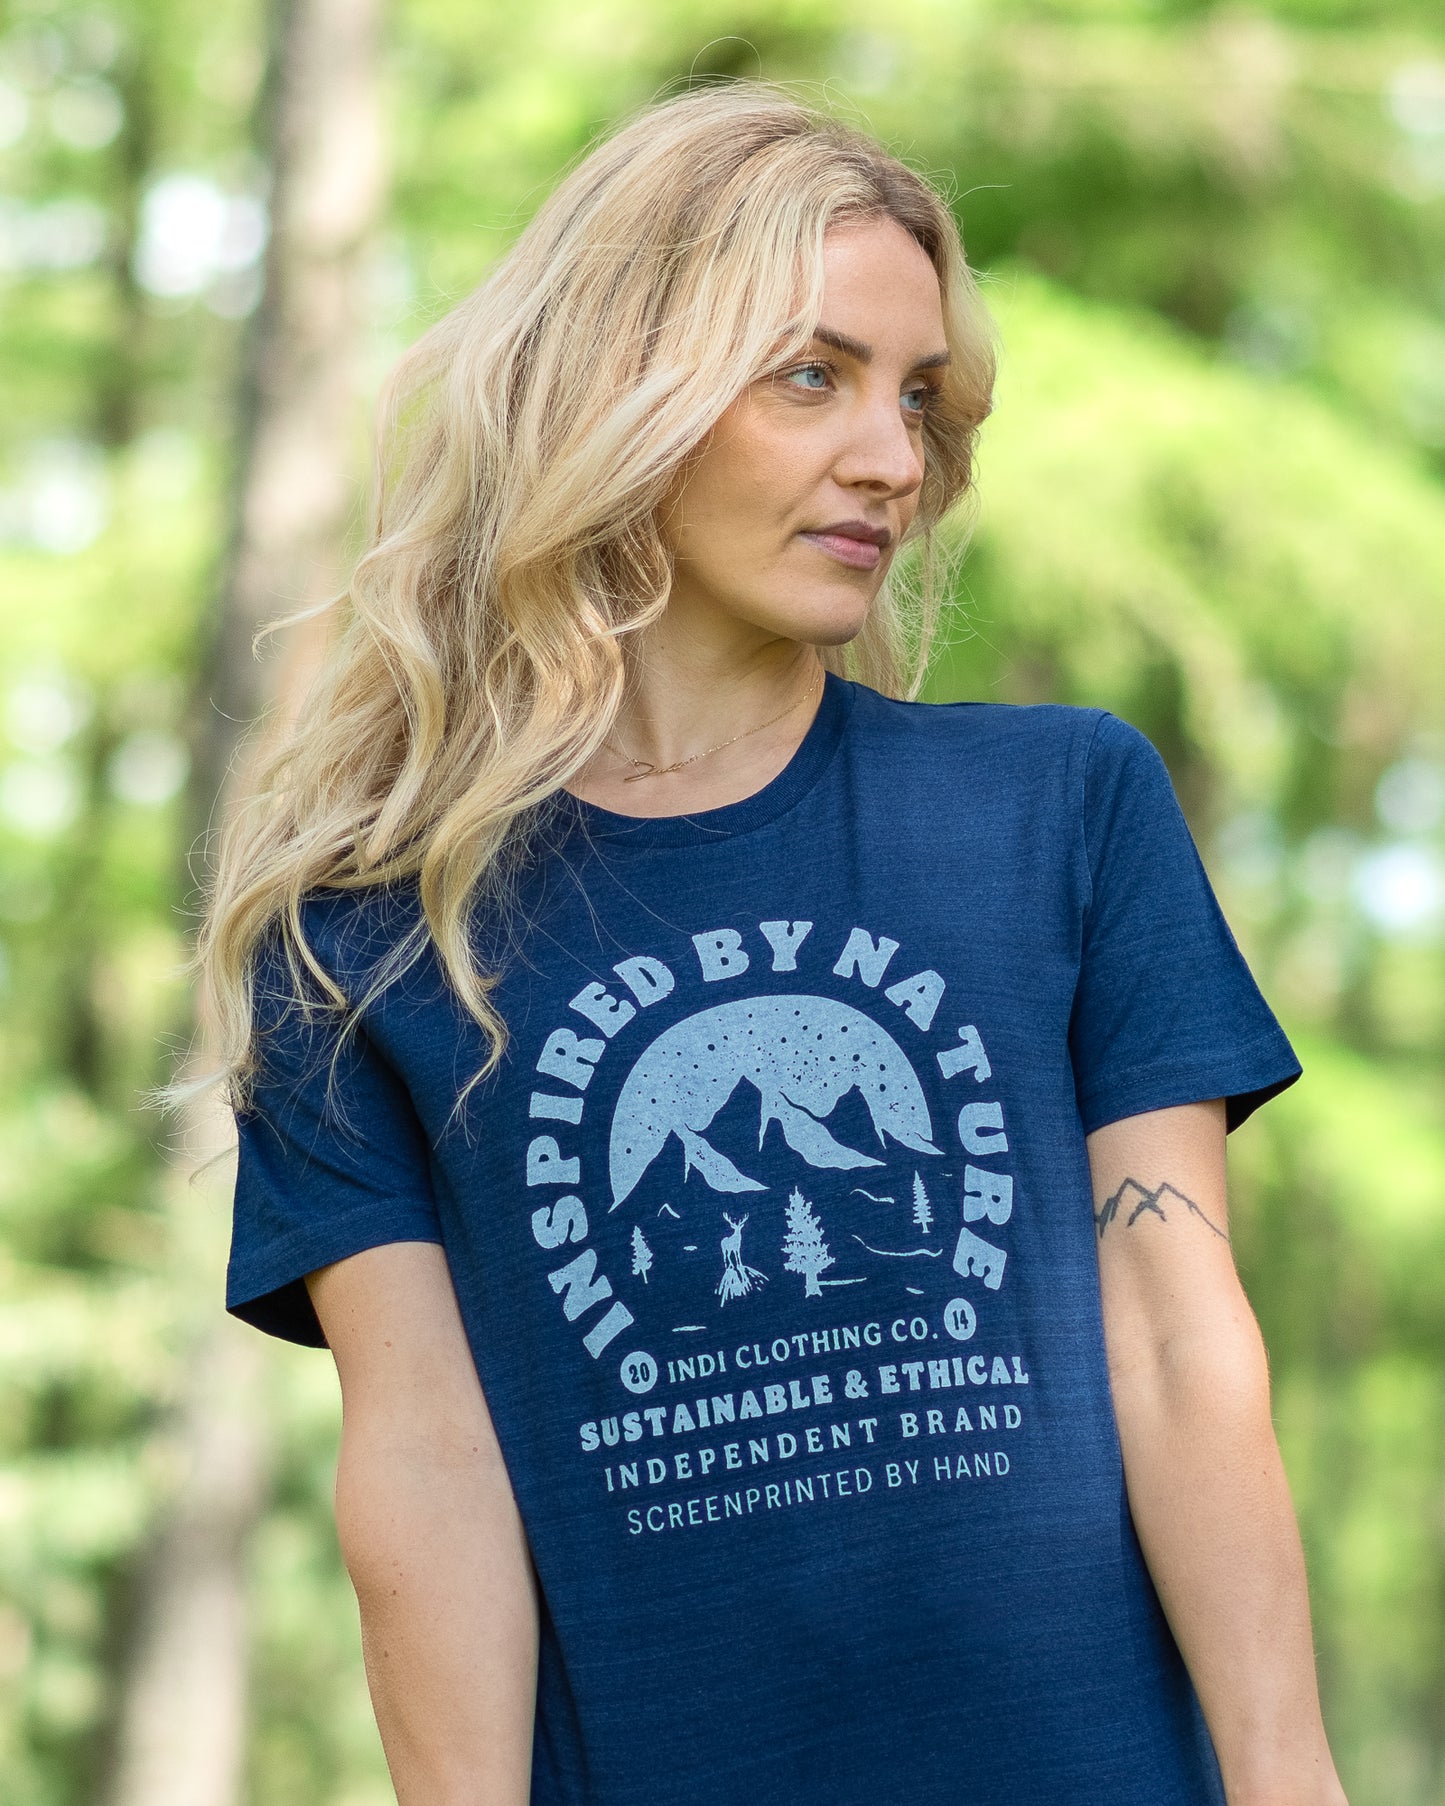 'Inspired By Nature' T-shirt in Vintage Denim Blue